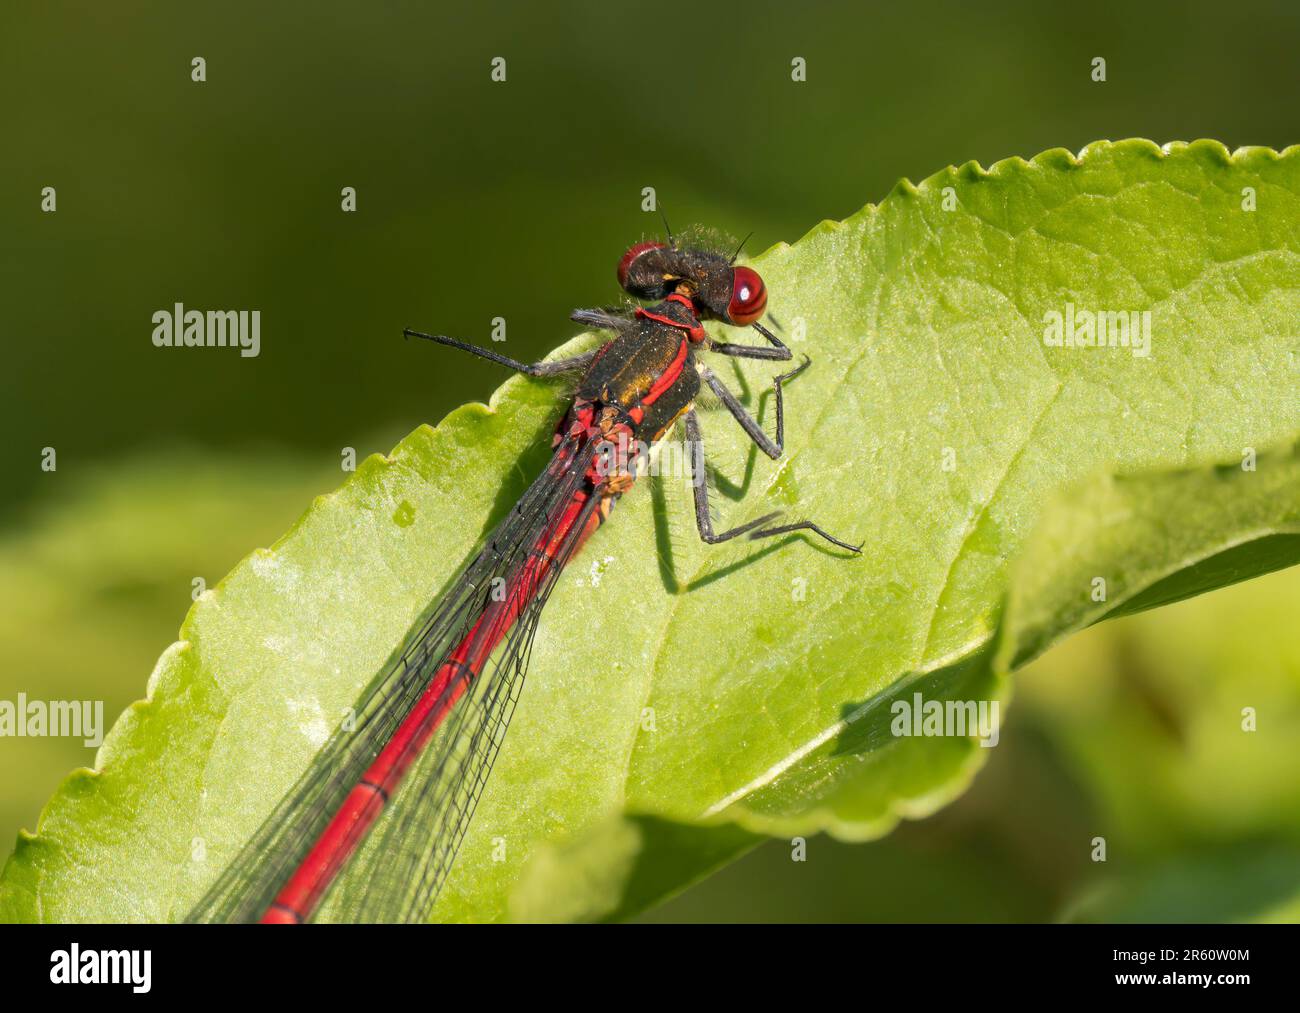 A male Large Red Damselfly, (Pyrrhosoma nymphula), at rest on a leaf Stock Photo